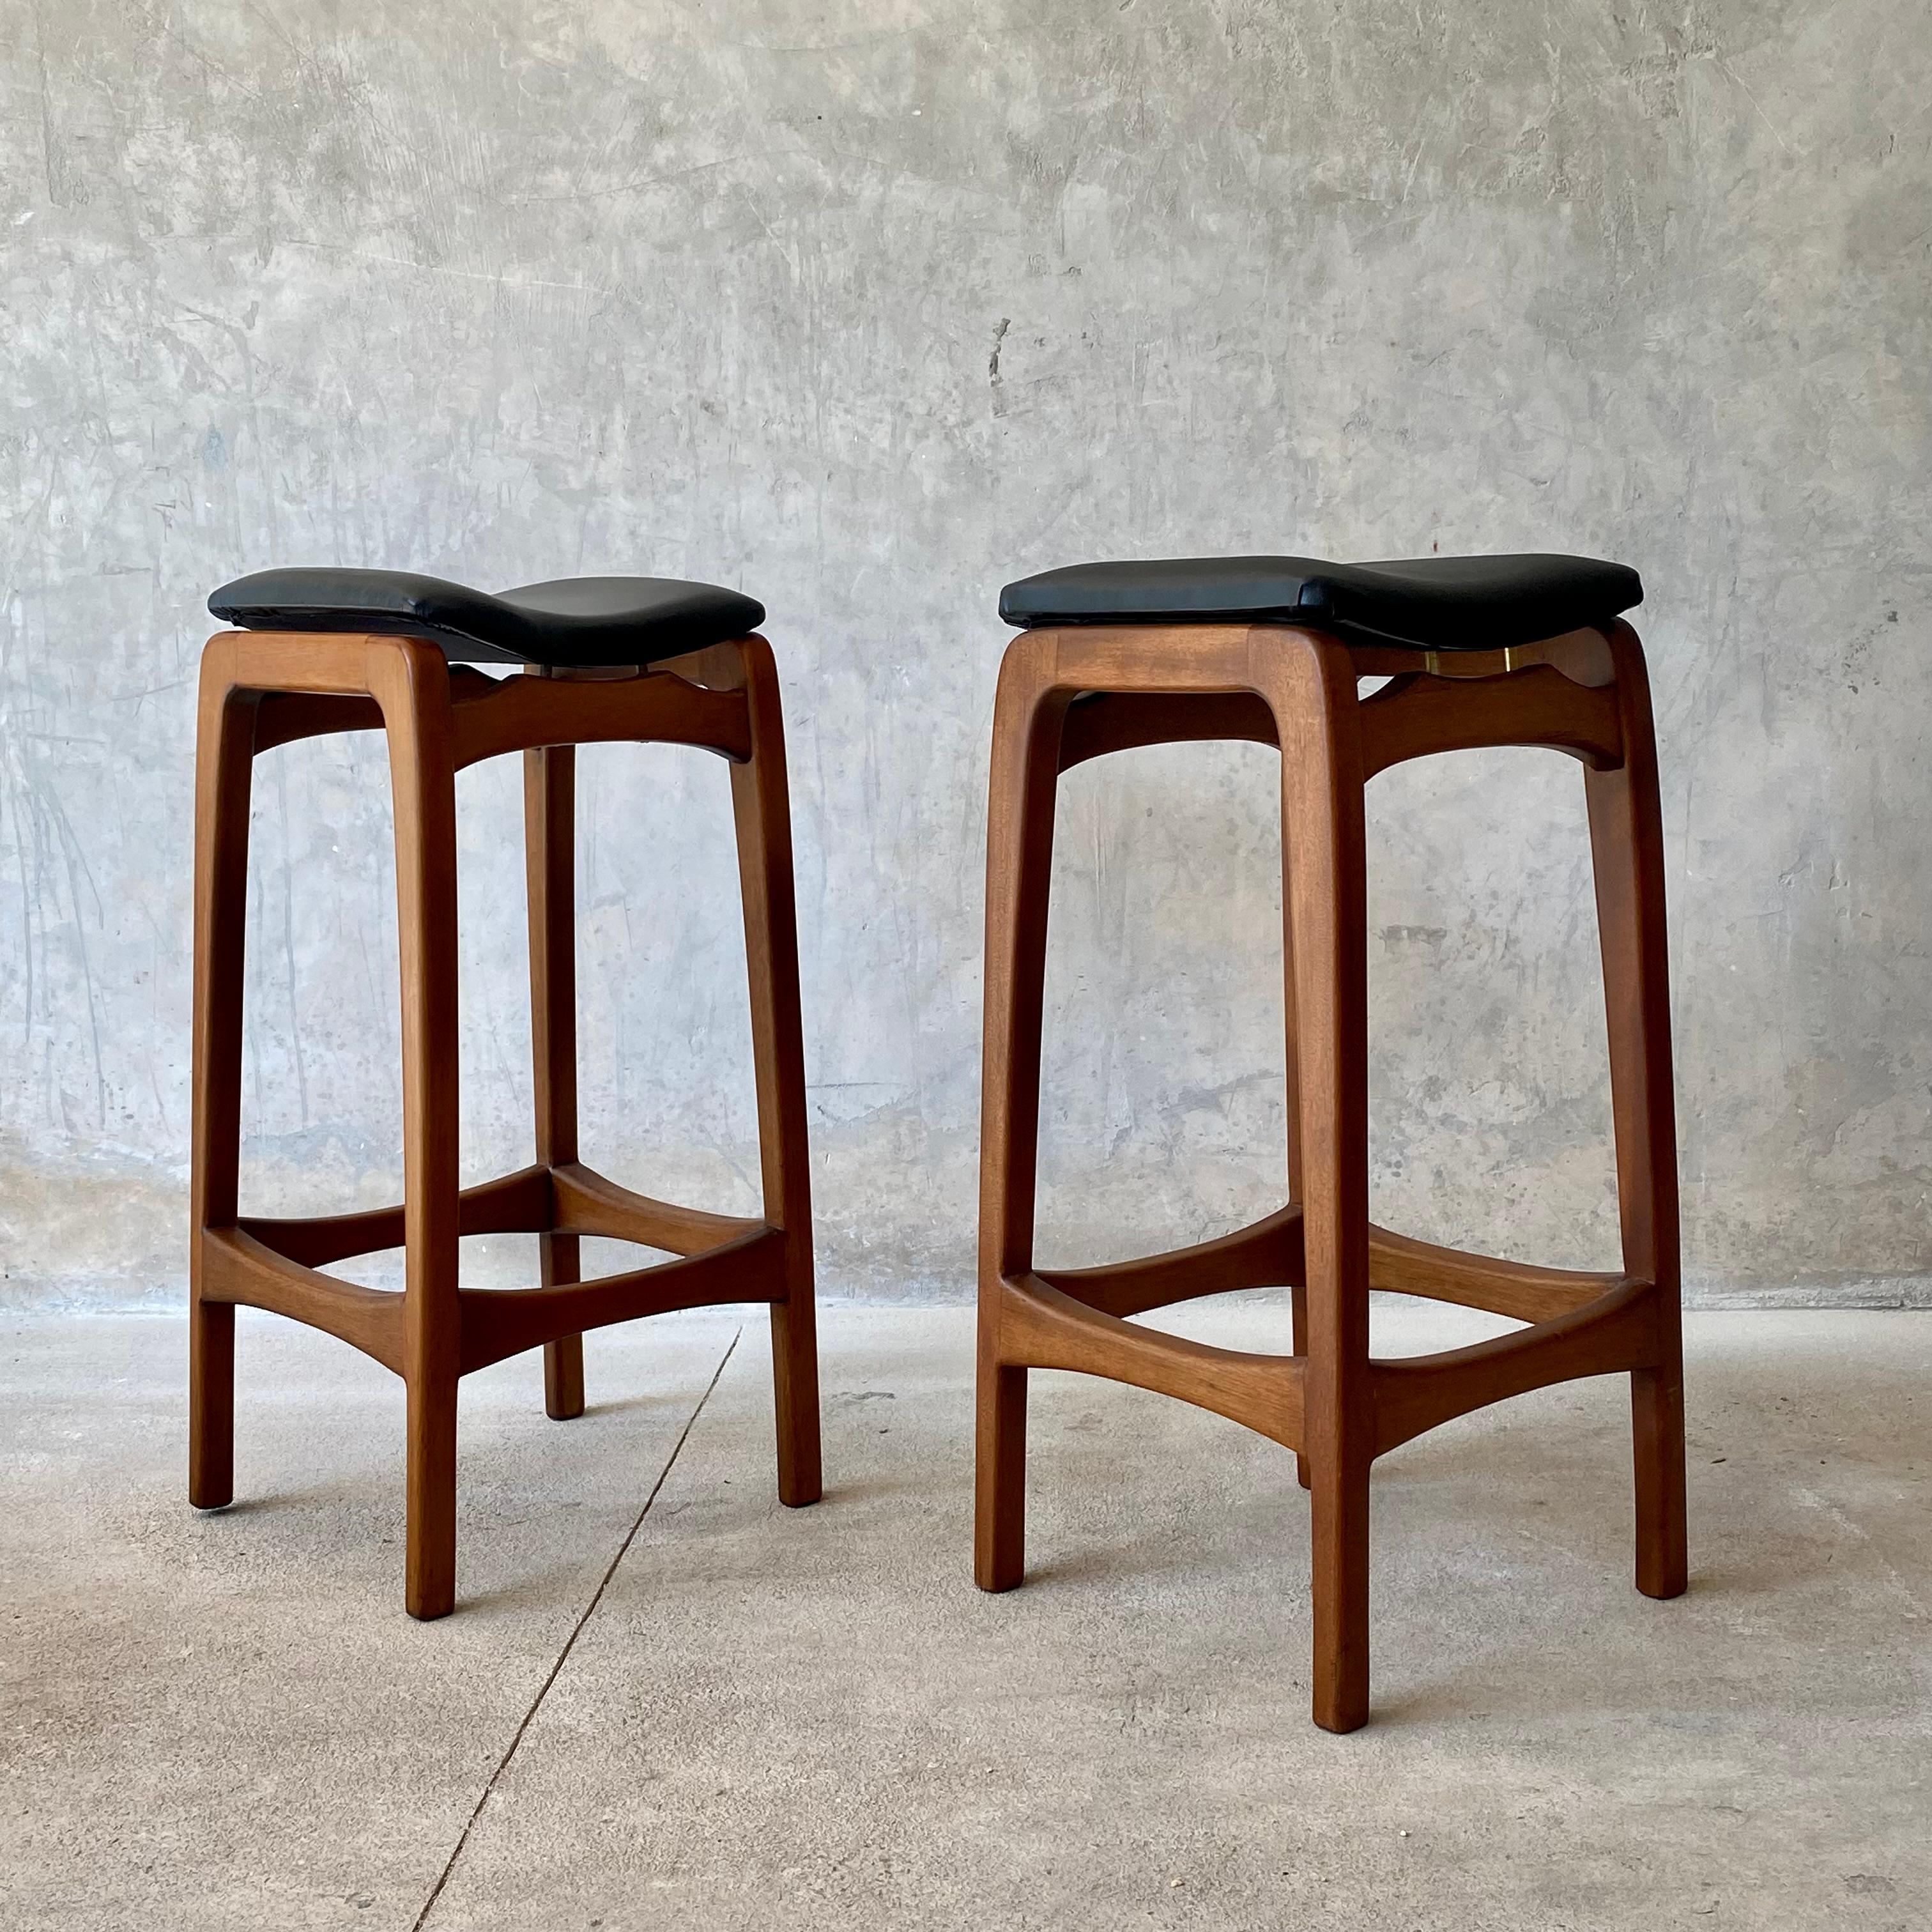 Bar Stool, Utility Bar Stool, Walnut and Faux Leather In New Condition For Sale In Mérida, Yucatan